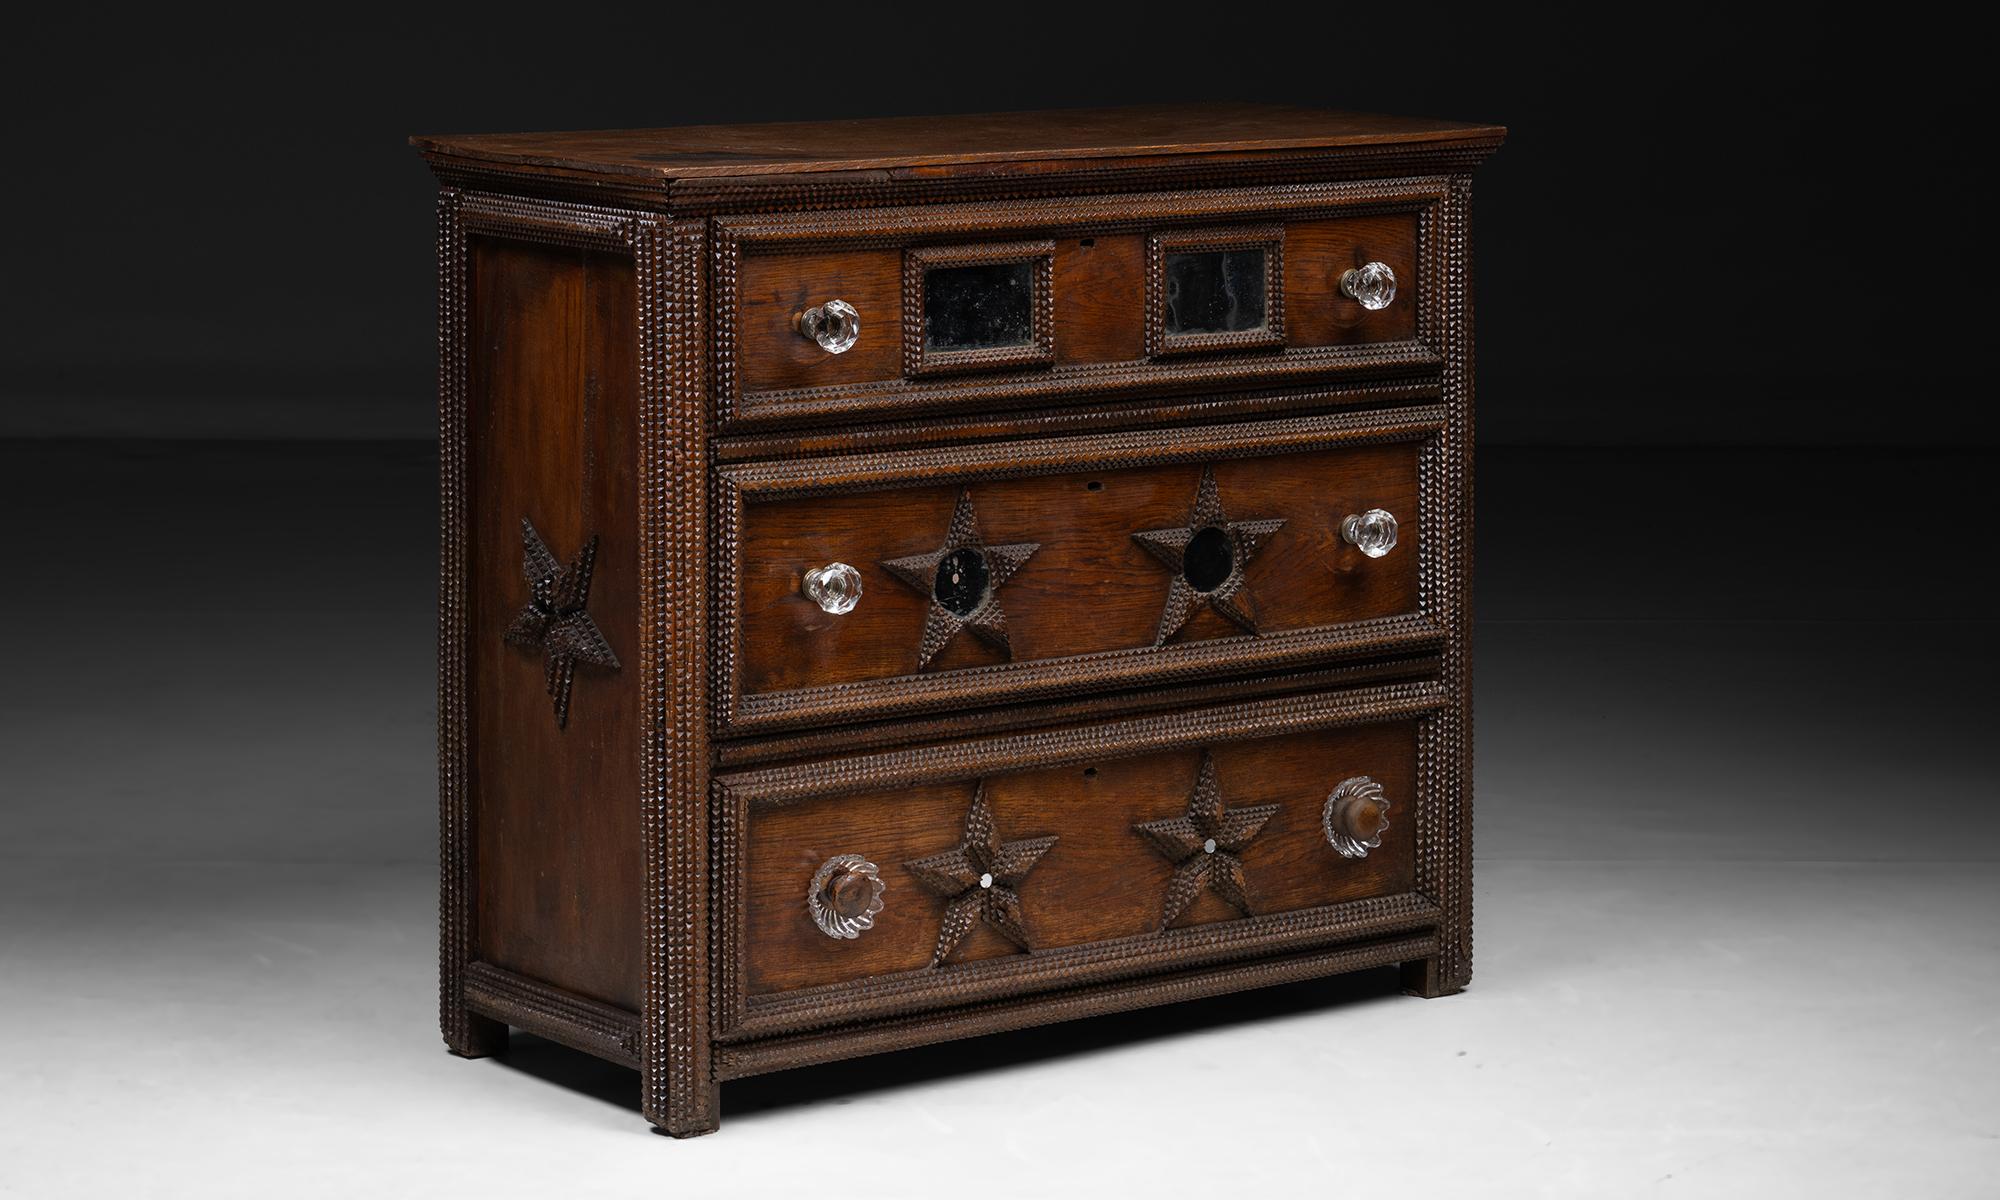 Tramp Art Chest

France circa 1900

Chest of drawers with extensive finite detailing, glass knobs, and mirror on drawers.

Measures 43.25”L x 19.5”d x 38.25”h